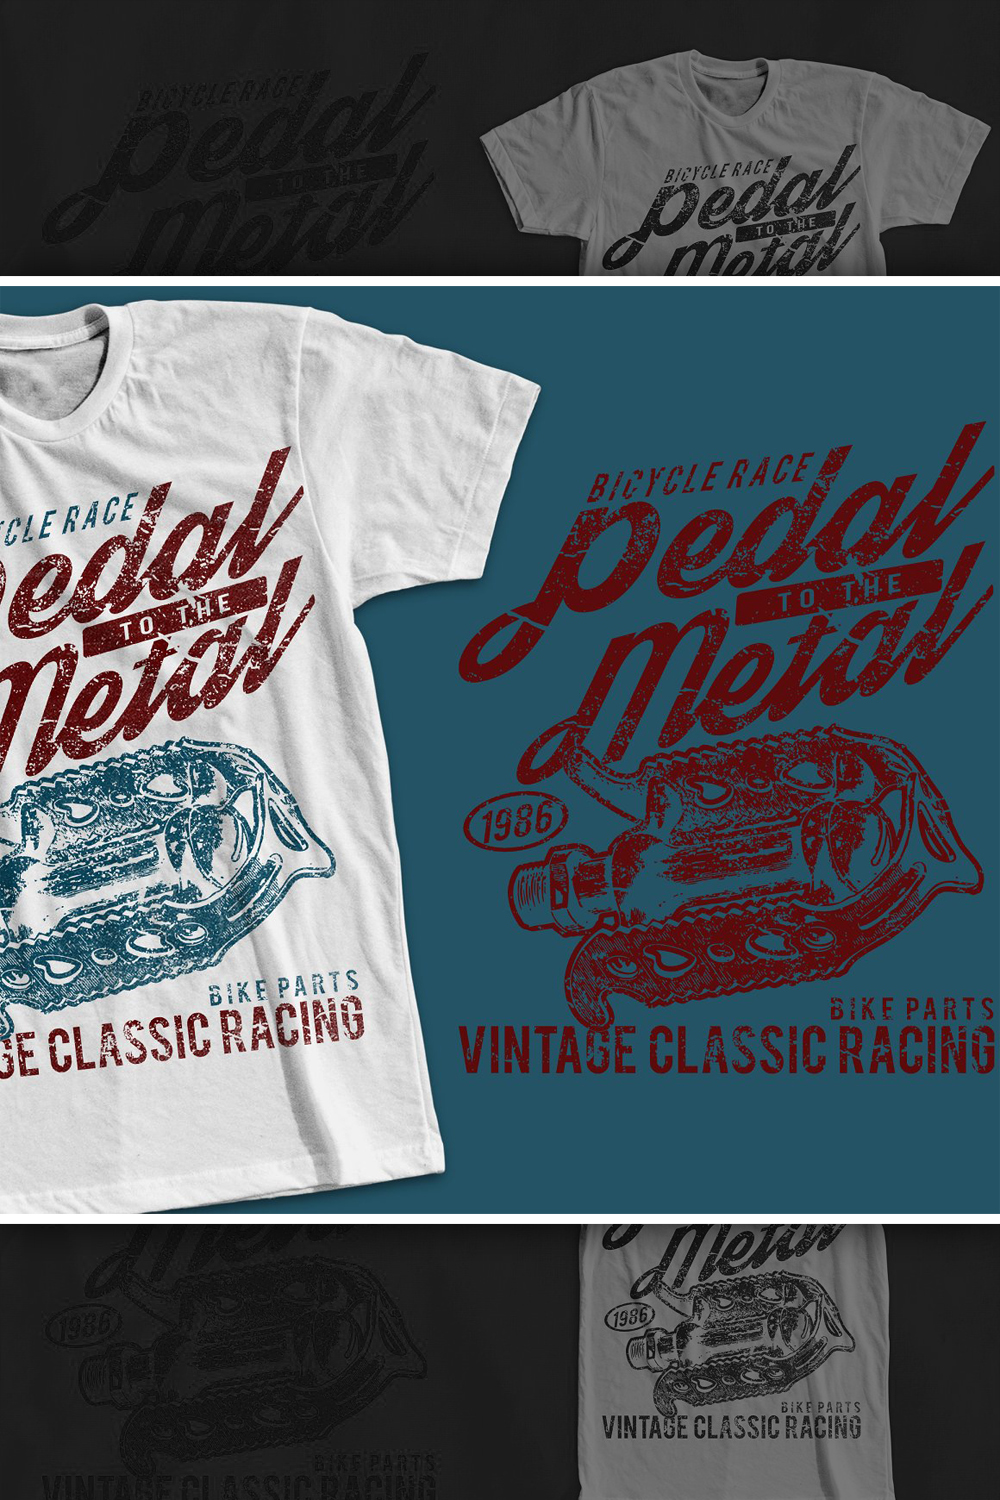 Pedal to the metal t shirt design of pinterest.